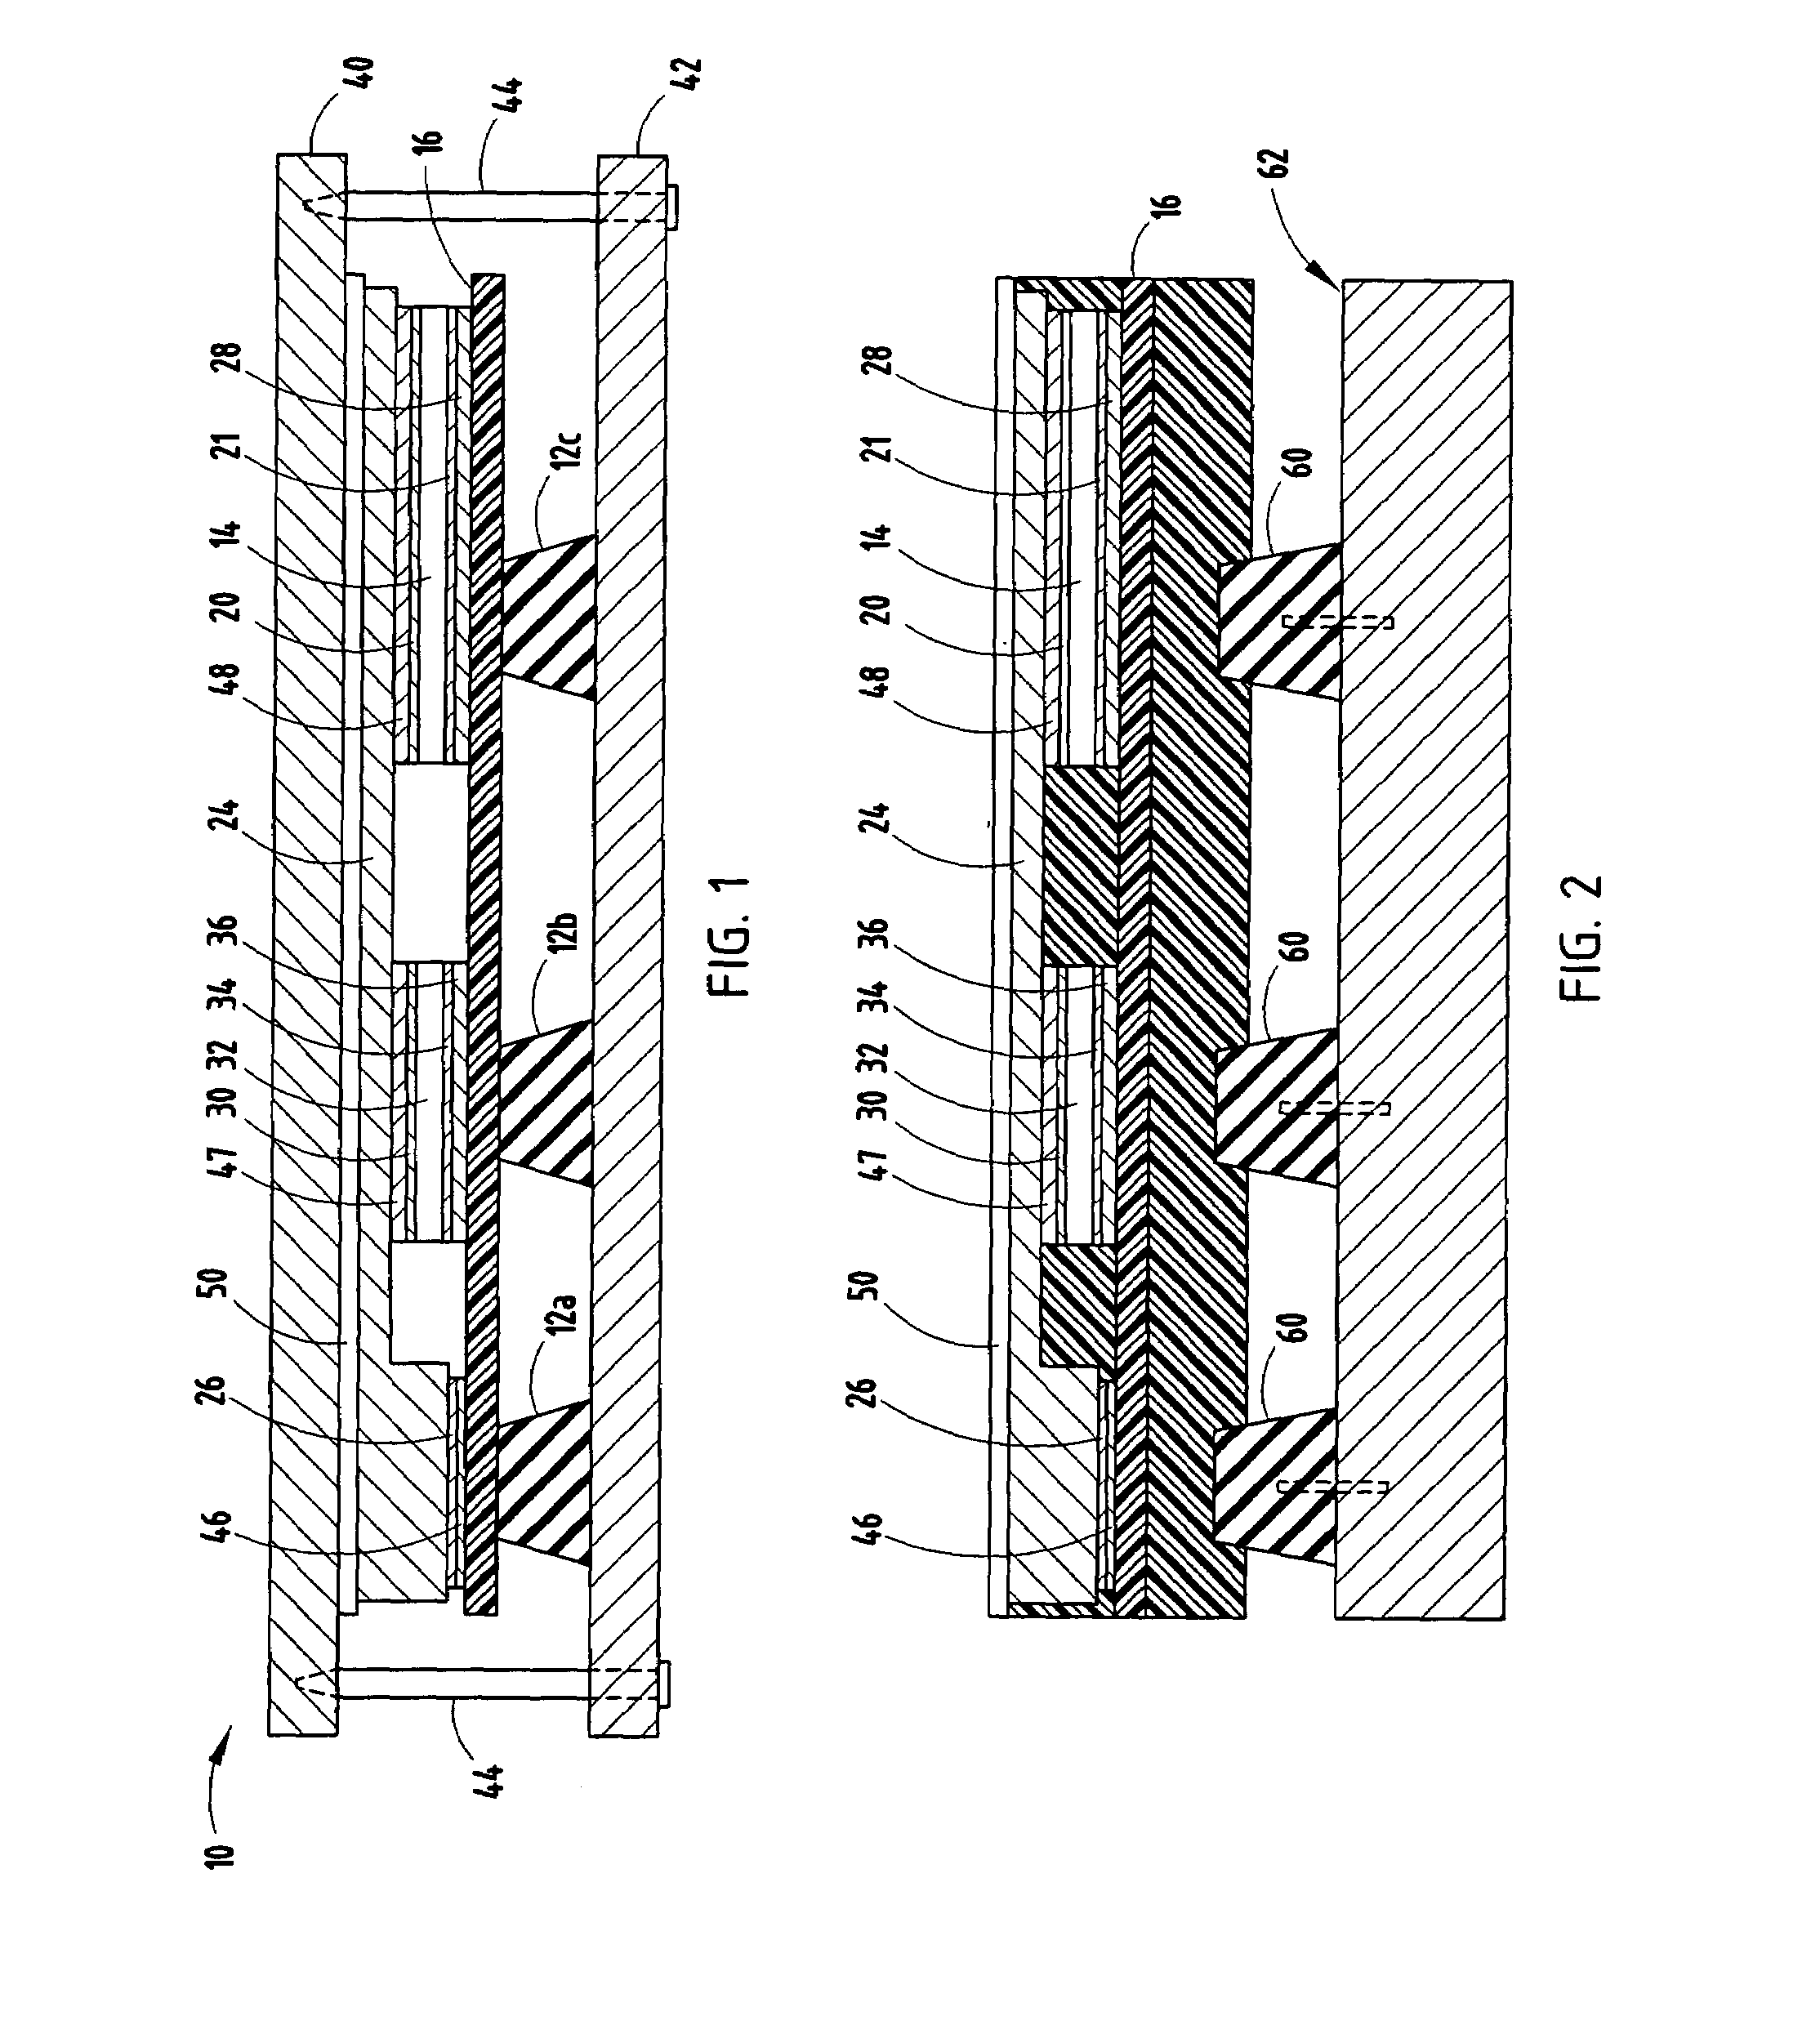 Compression connection for vertical IC packages